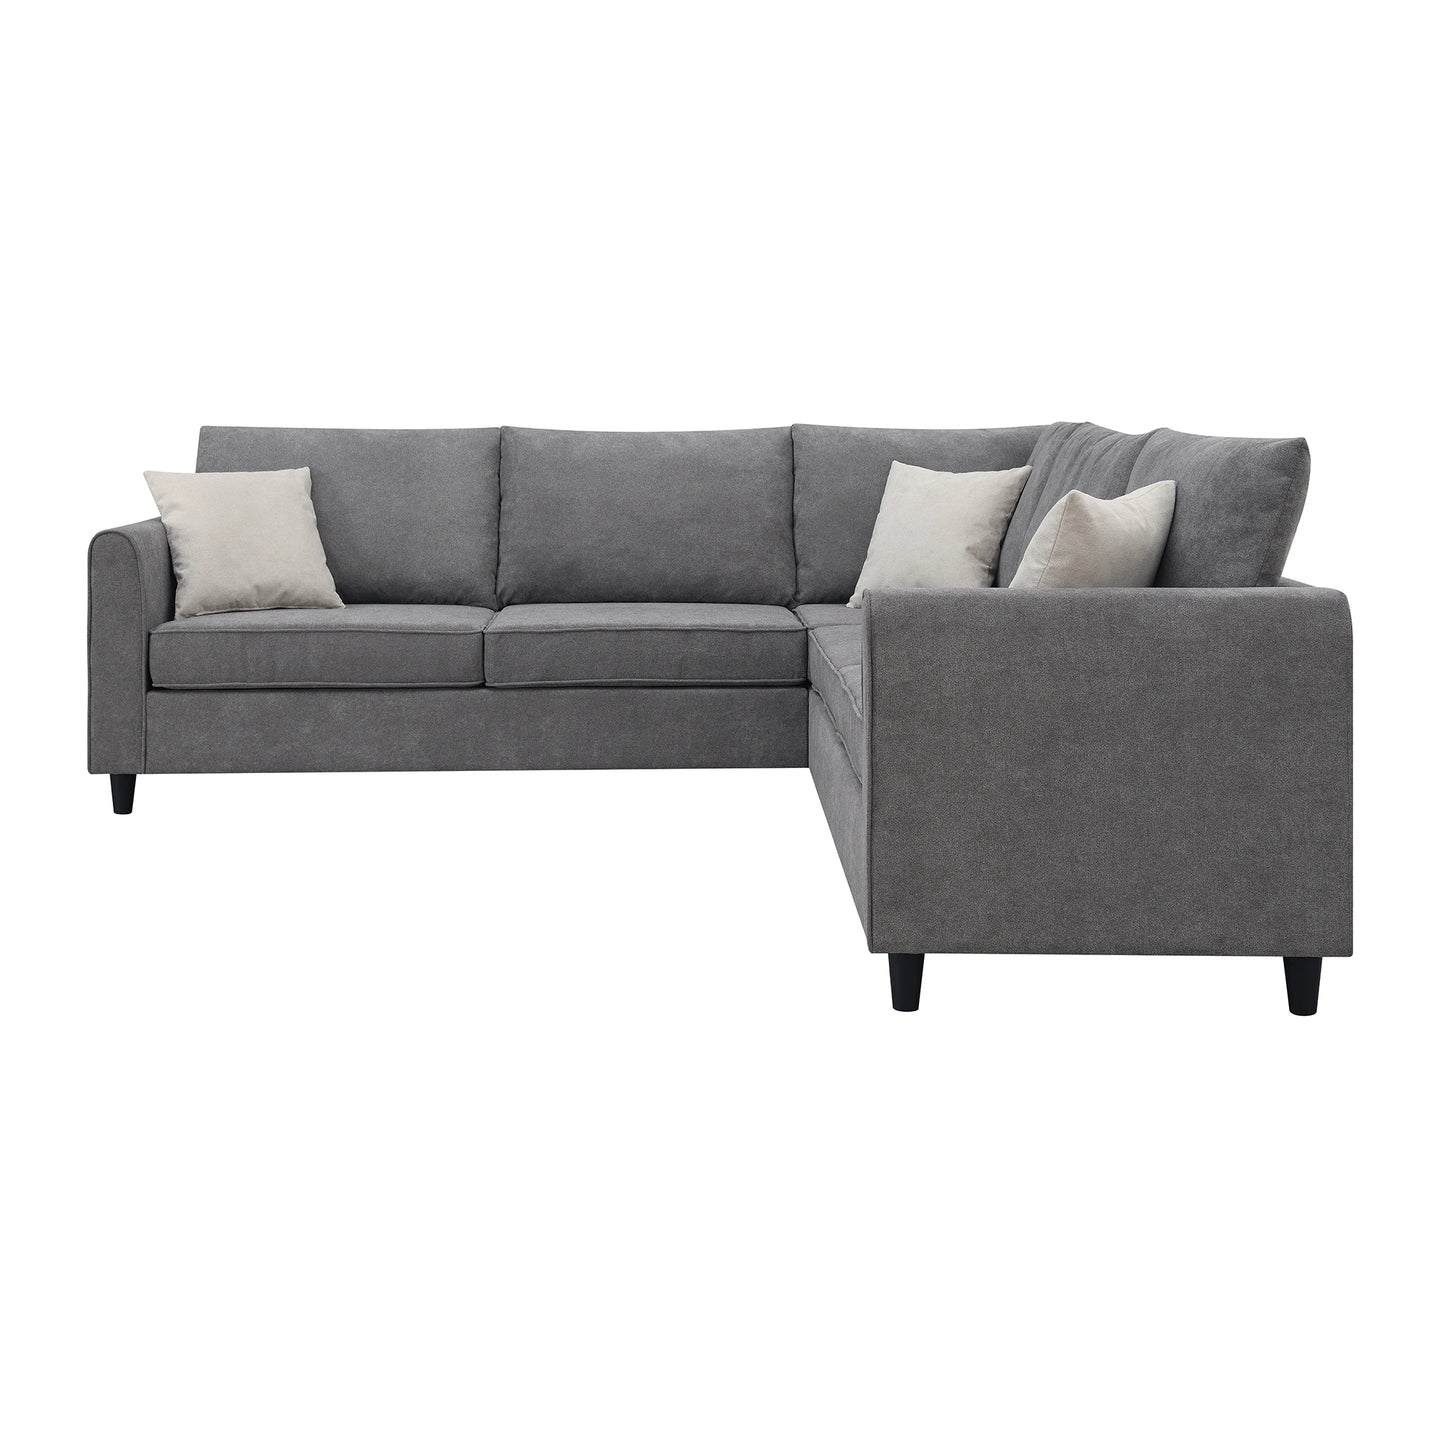 Modern Upholstered Living Room Sectional Sofa, L Shape Sofa Set with 3 Pillows